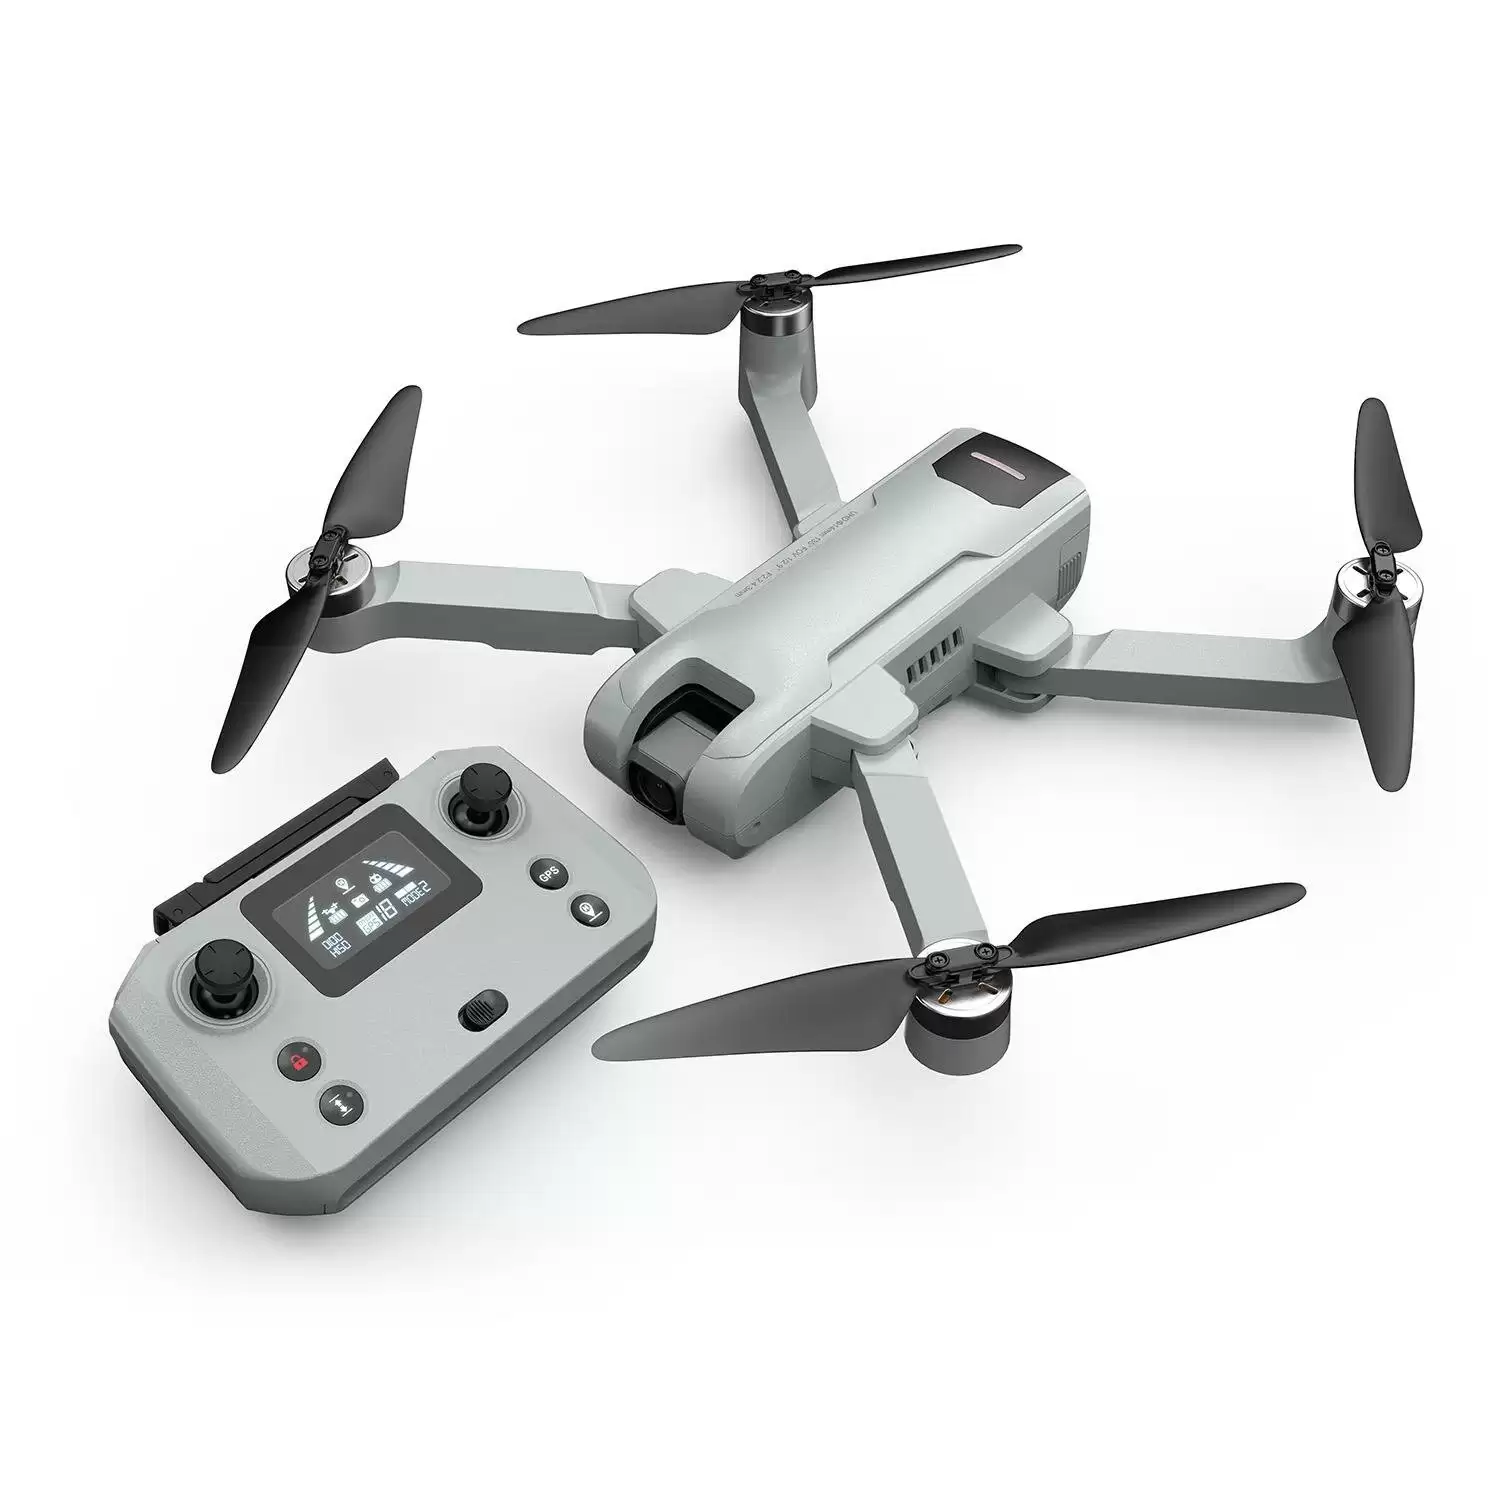 Order In Just $110.4 Mjx V6 Gps 2.7k 5g Wifi Camera Optical Flow Positioning Ultrasonic Brushless Foldable Rc Quadcopter Rtf-two Batteries/three Batteries Version With This Coupon At Banggood